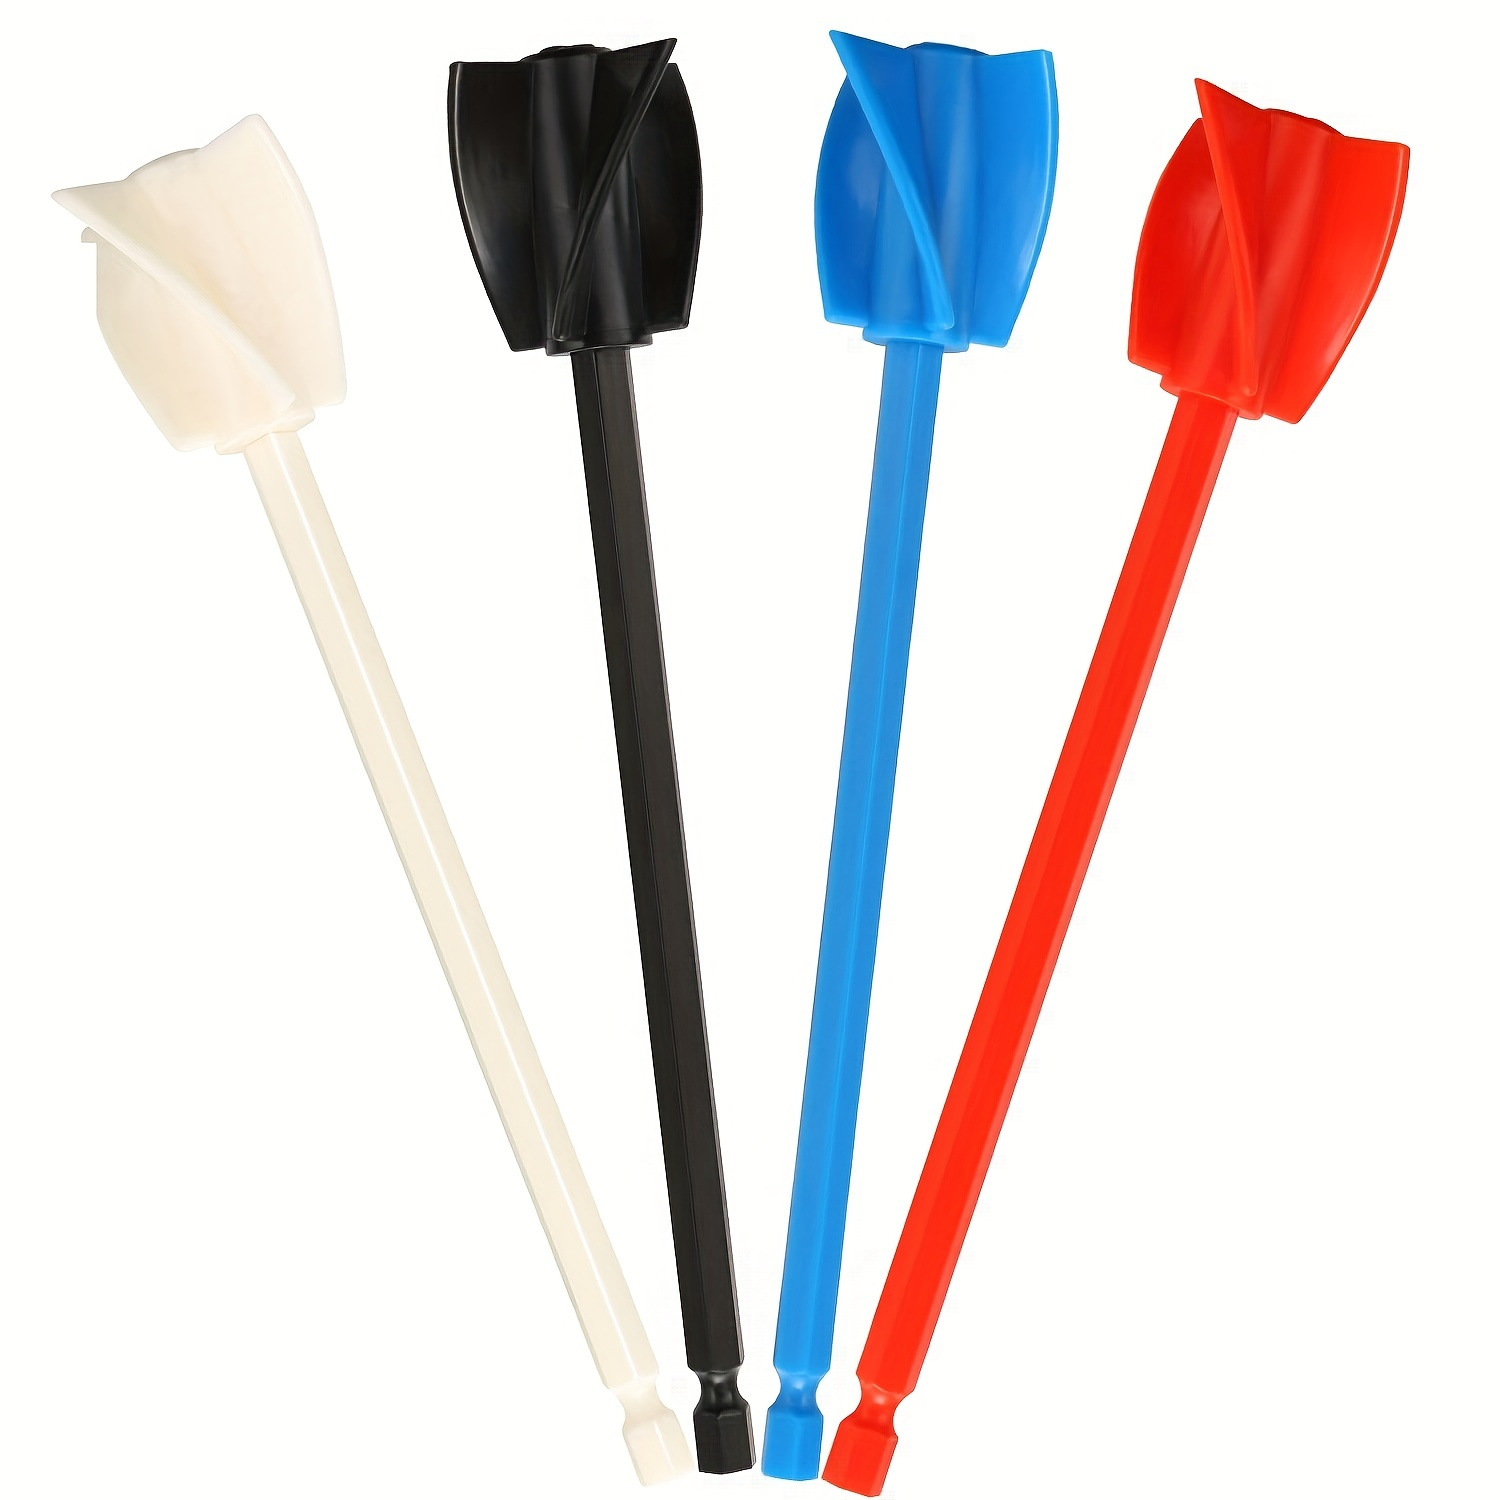 

4pcs Resin Mixer Paddles, Epoxy Mixer Attachment Reusable Paint Stirrer Drill Attachment Multipurpose Mixer Paddle For Powerful Mixing Resin Paint Pigment And Reduce Bubbles For Thick Liquid Mixing